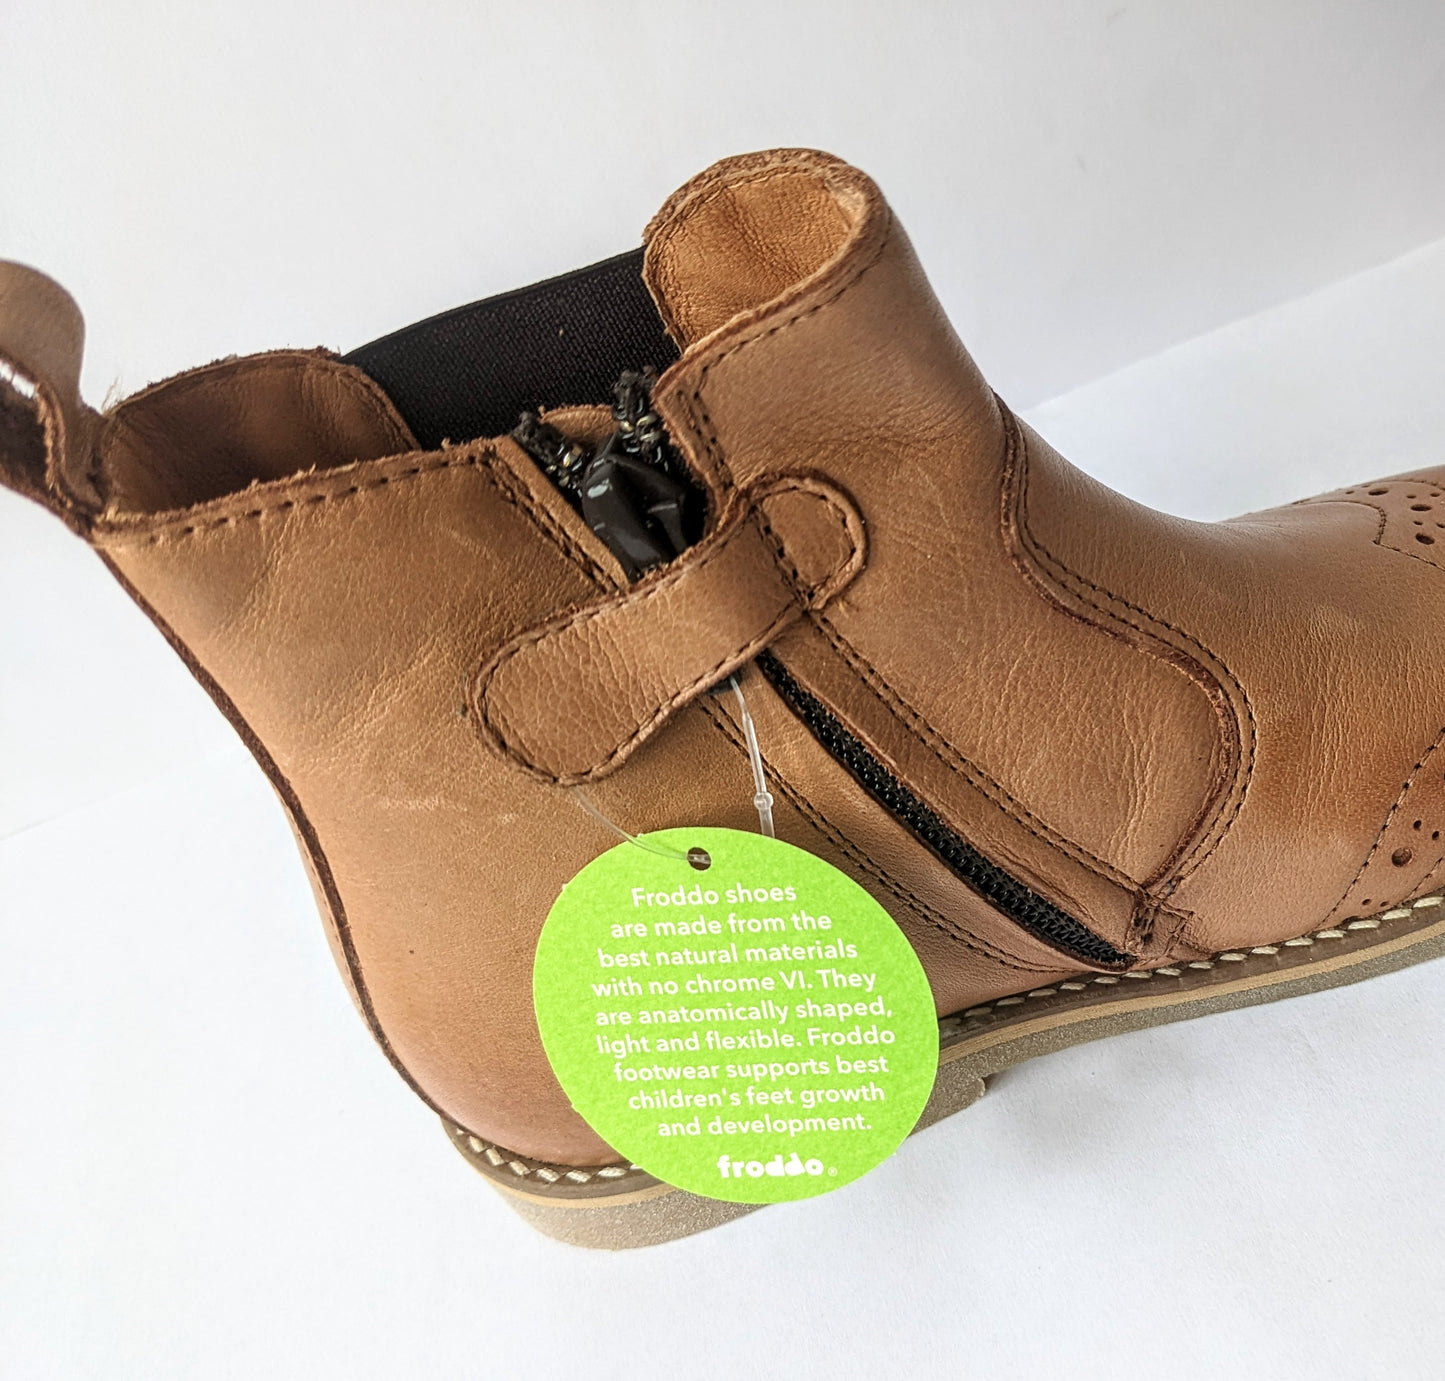 A unisex ankle boot by Froddo,style G3160173-9 in tan leather with zip fastening. Left side view.